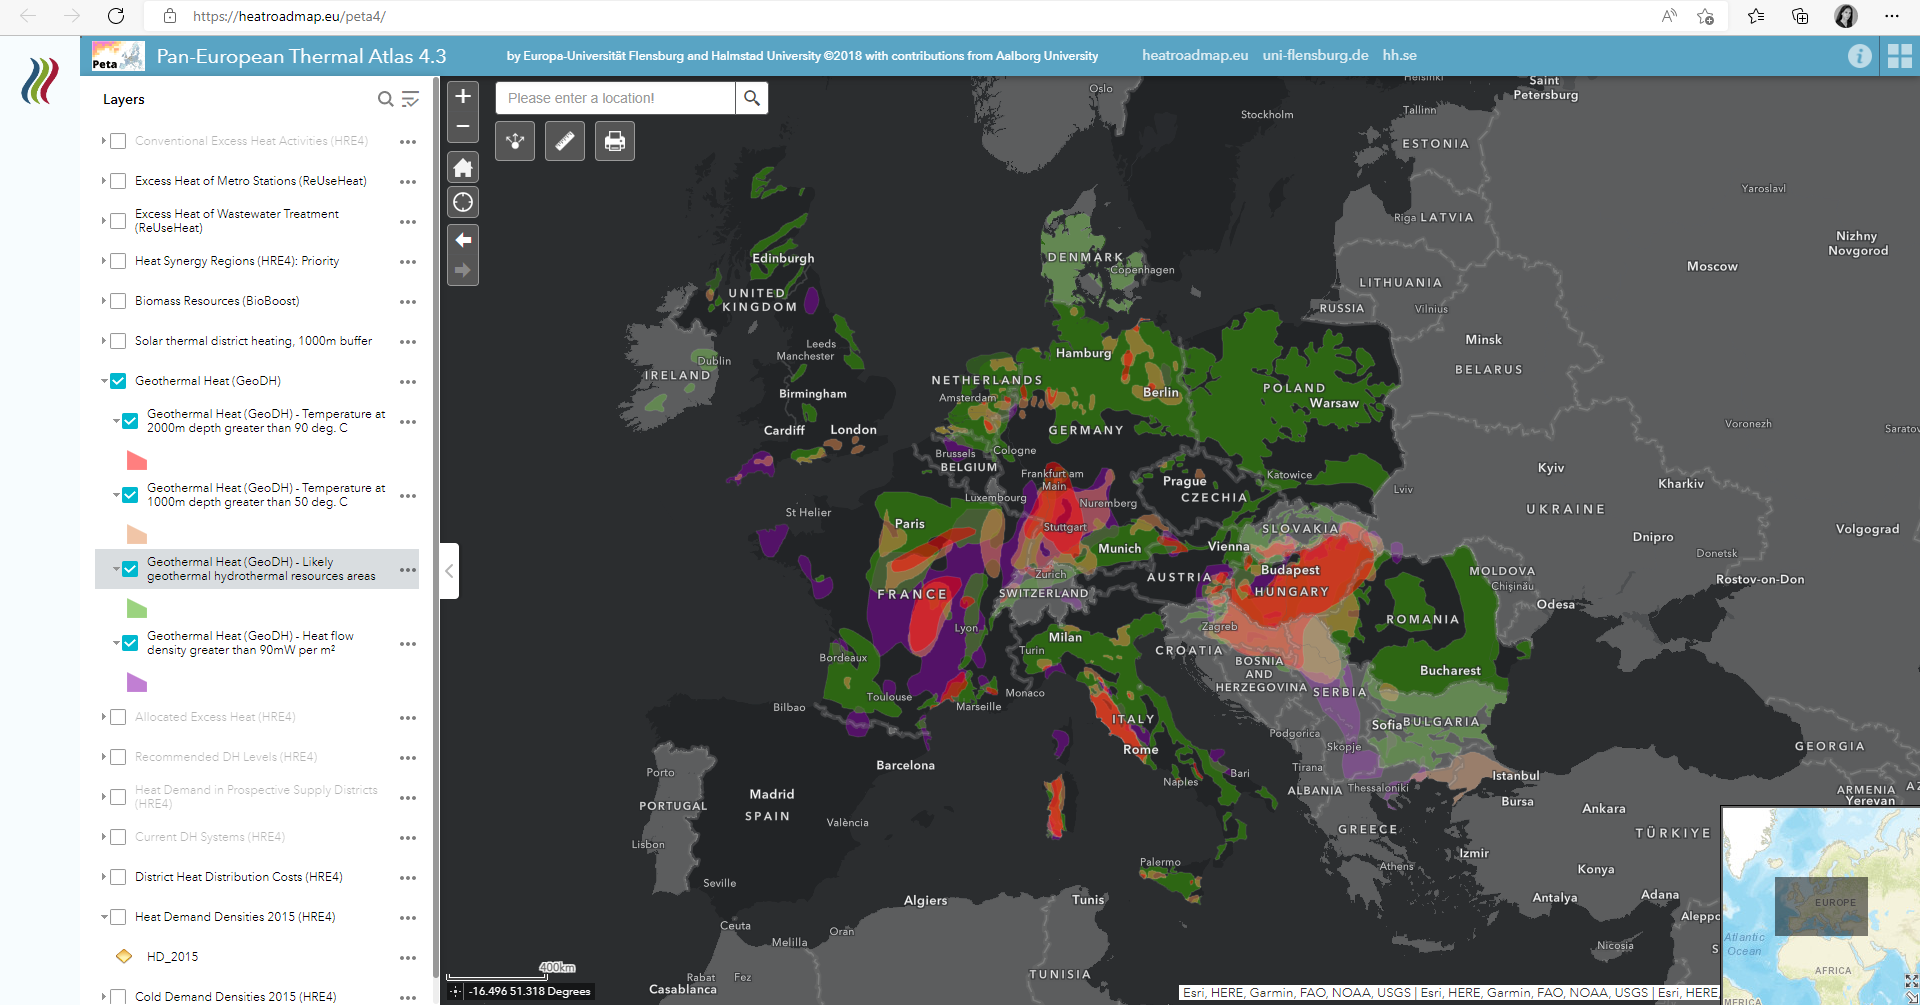 Figure 1: Heat map of Europe, see further details in reference (3)